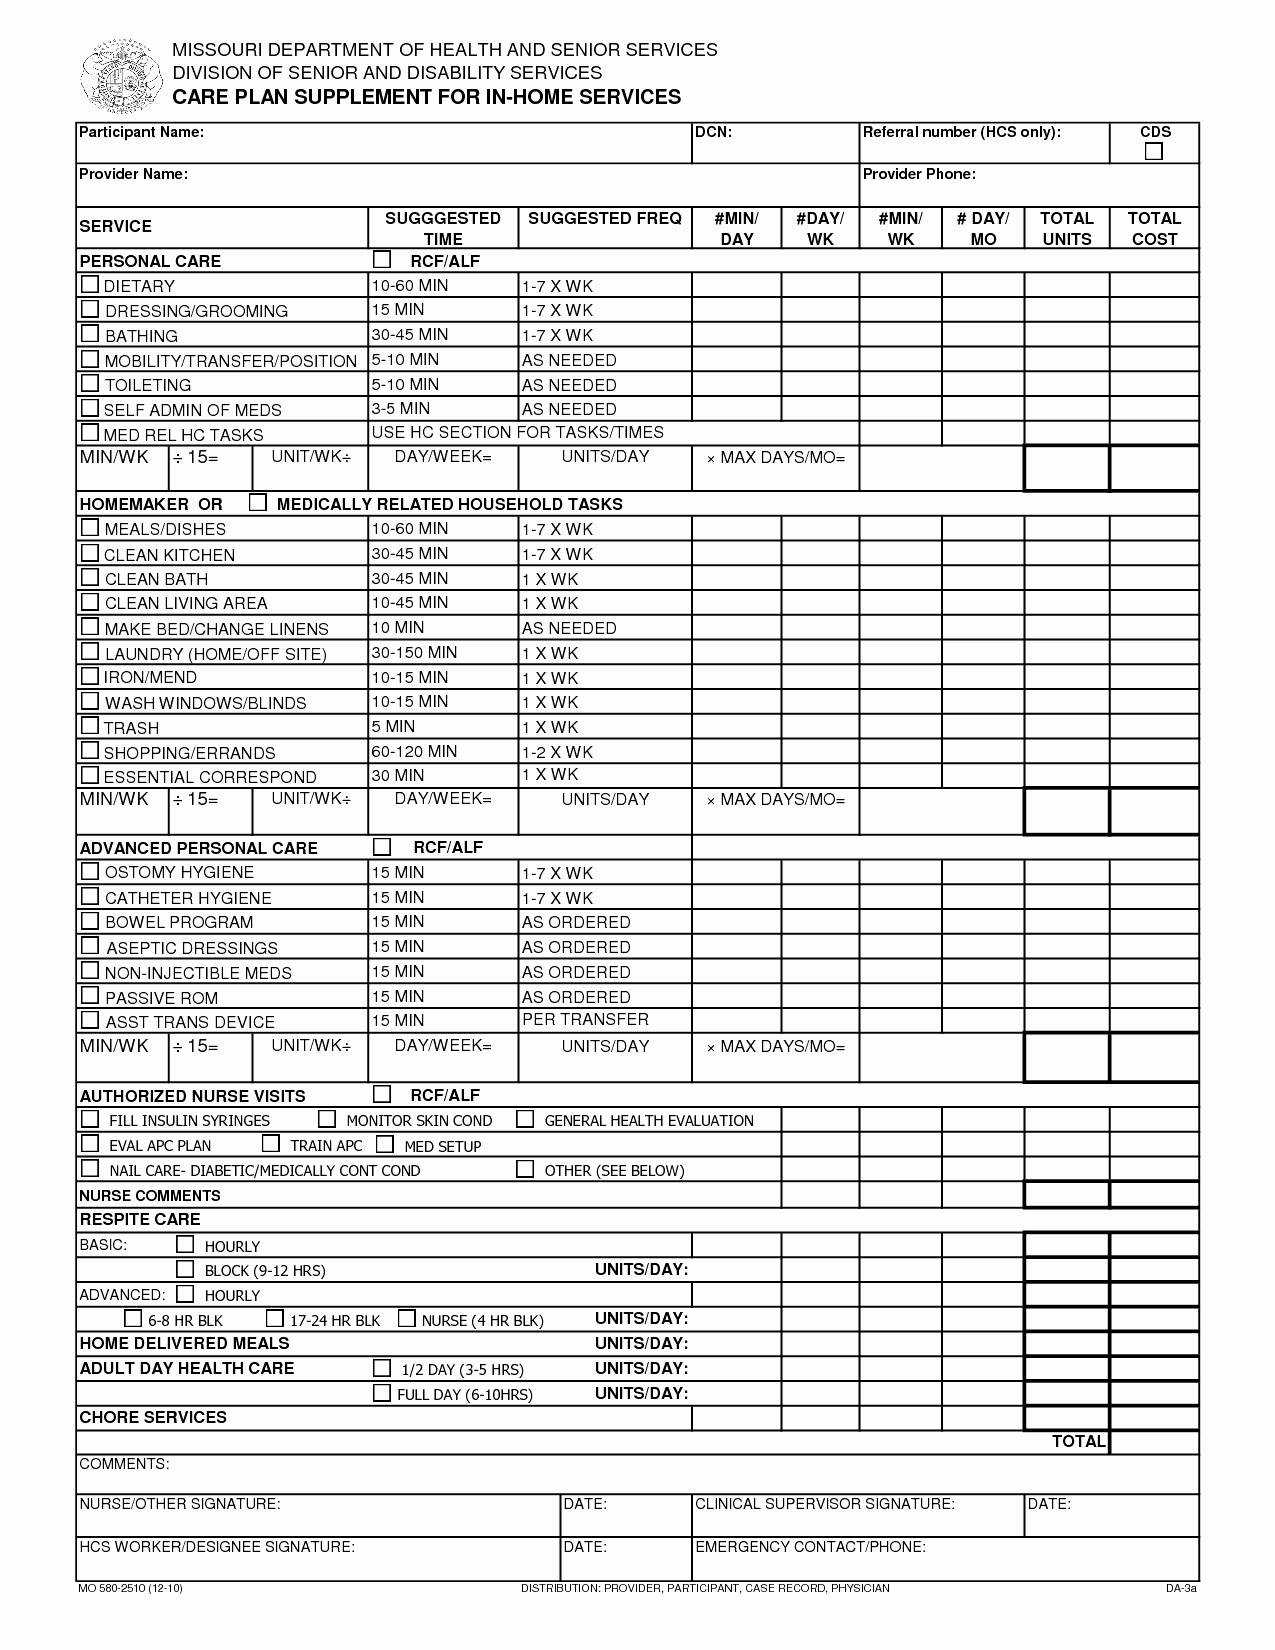 Money Management Worksheets for Students Pdf Also Financial Plan for Small Business Sample Template Papillon How to Do